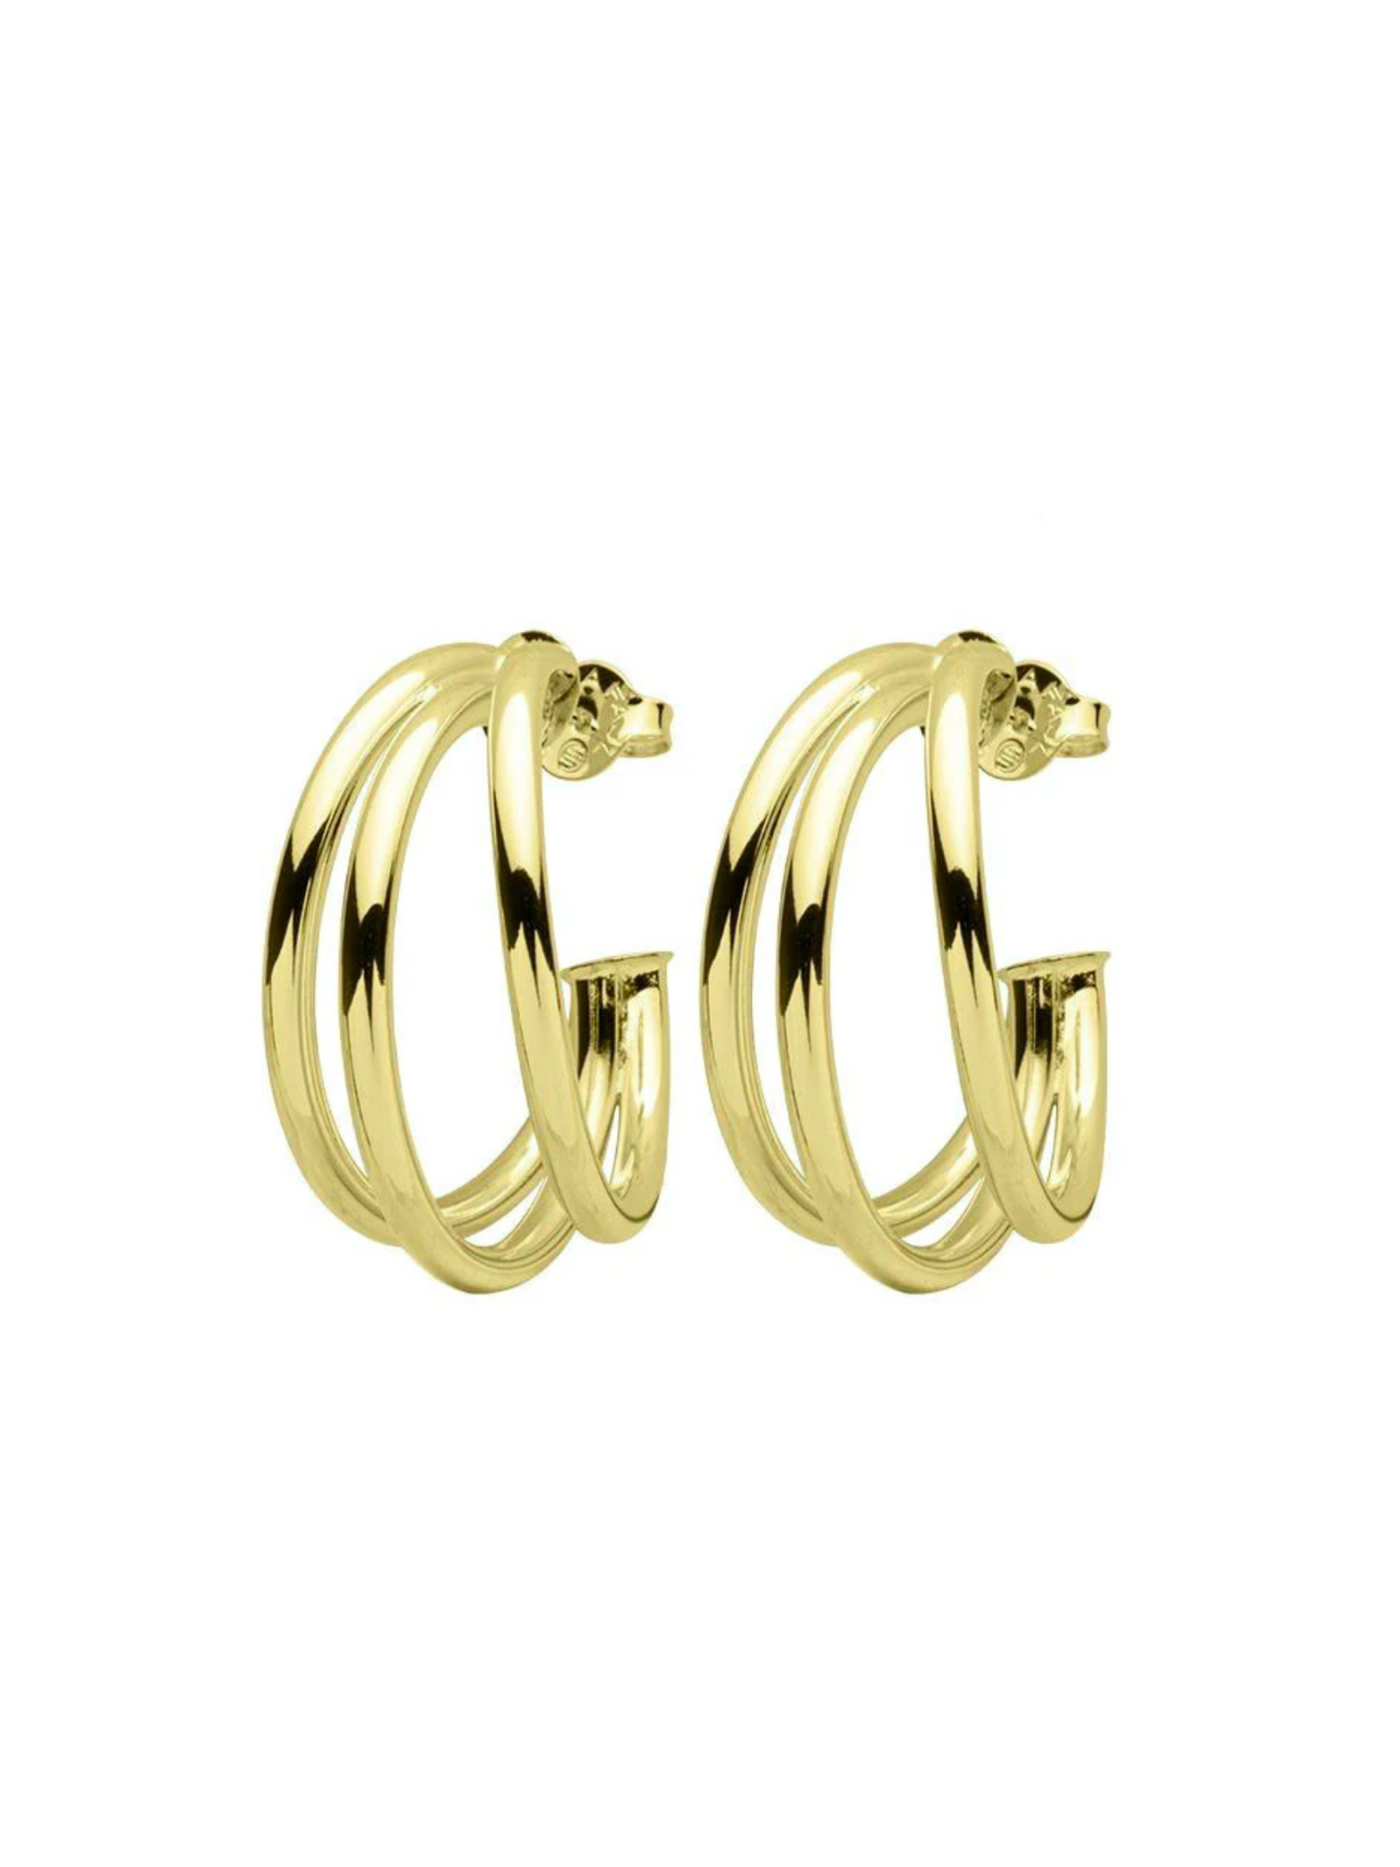 Shelia Fajl Small Claire Triple Hoops in shiny Gold on white background.